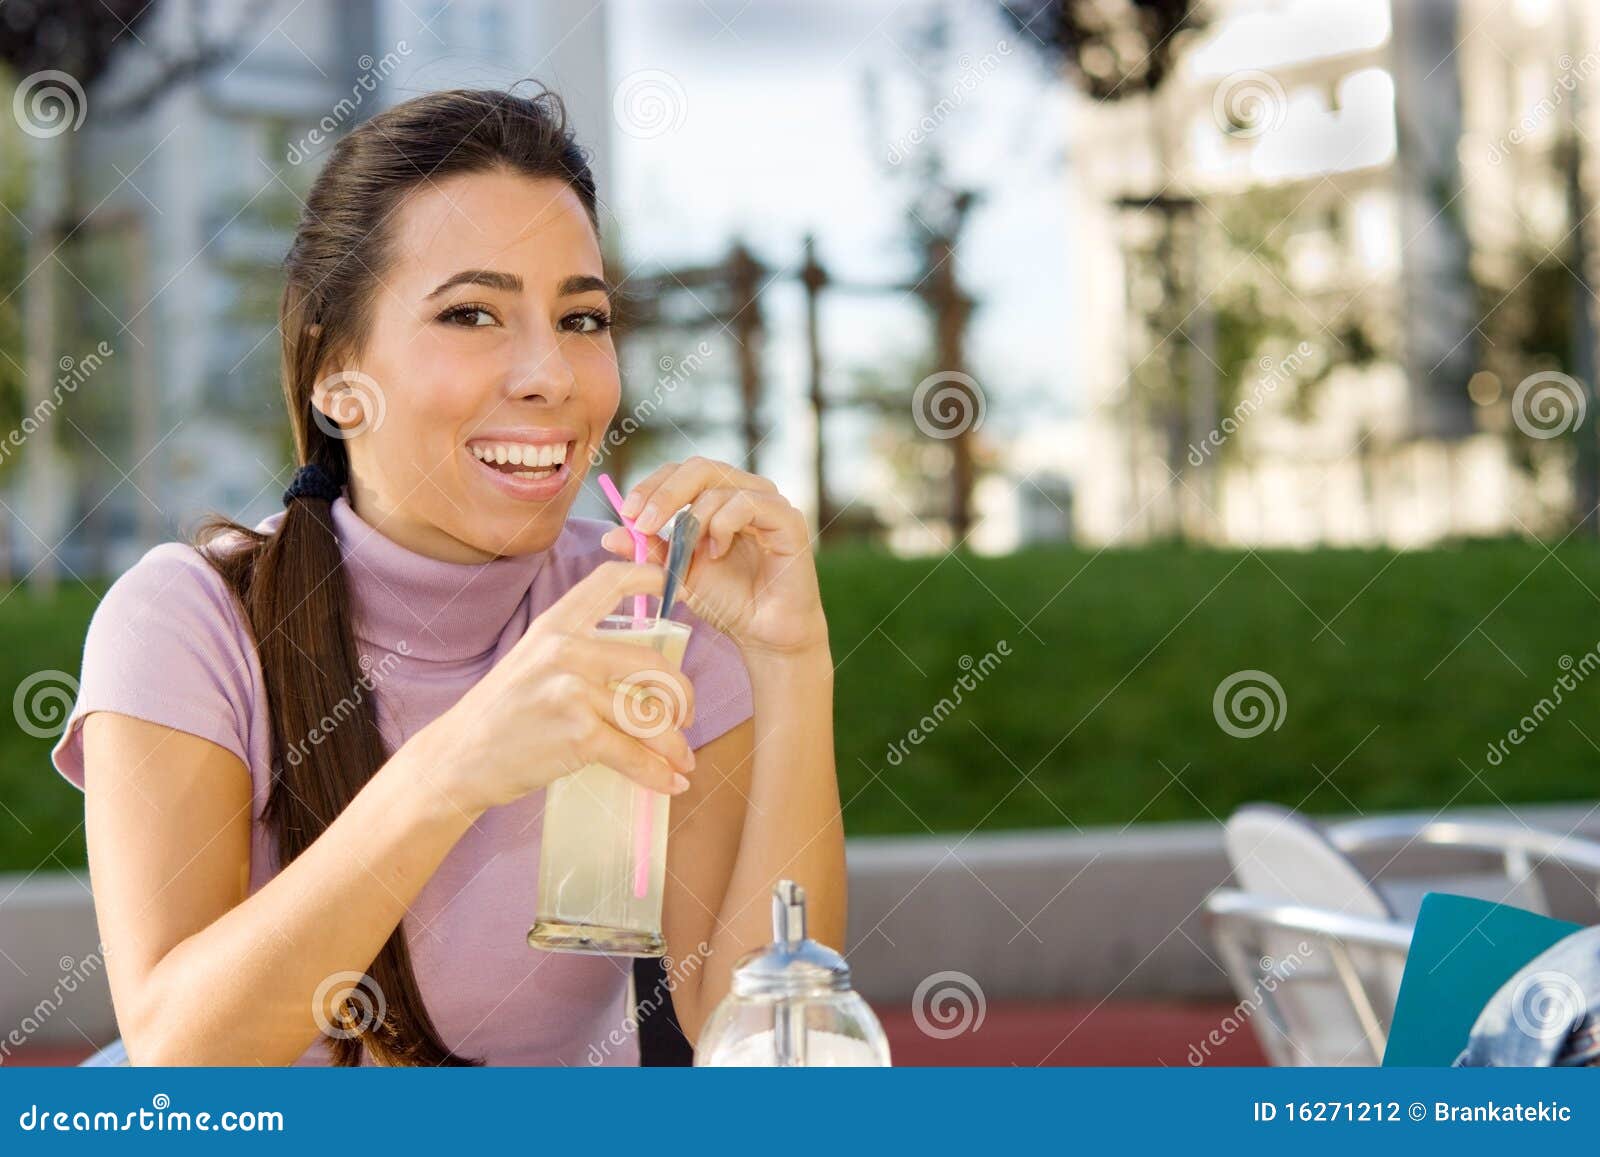 Young Woman With Lemonade Stock Photography - Image: 16271212